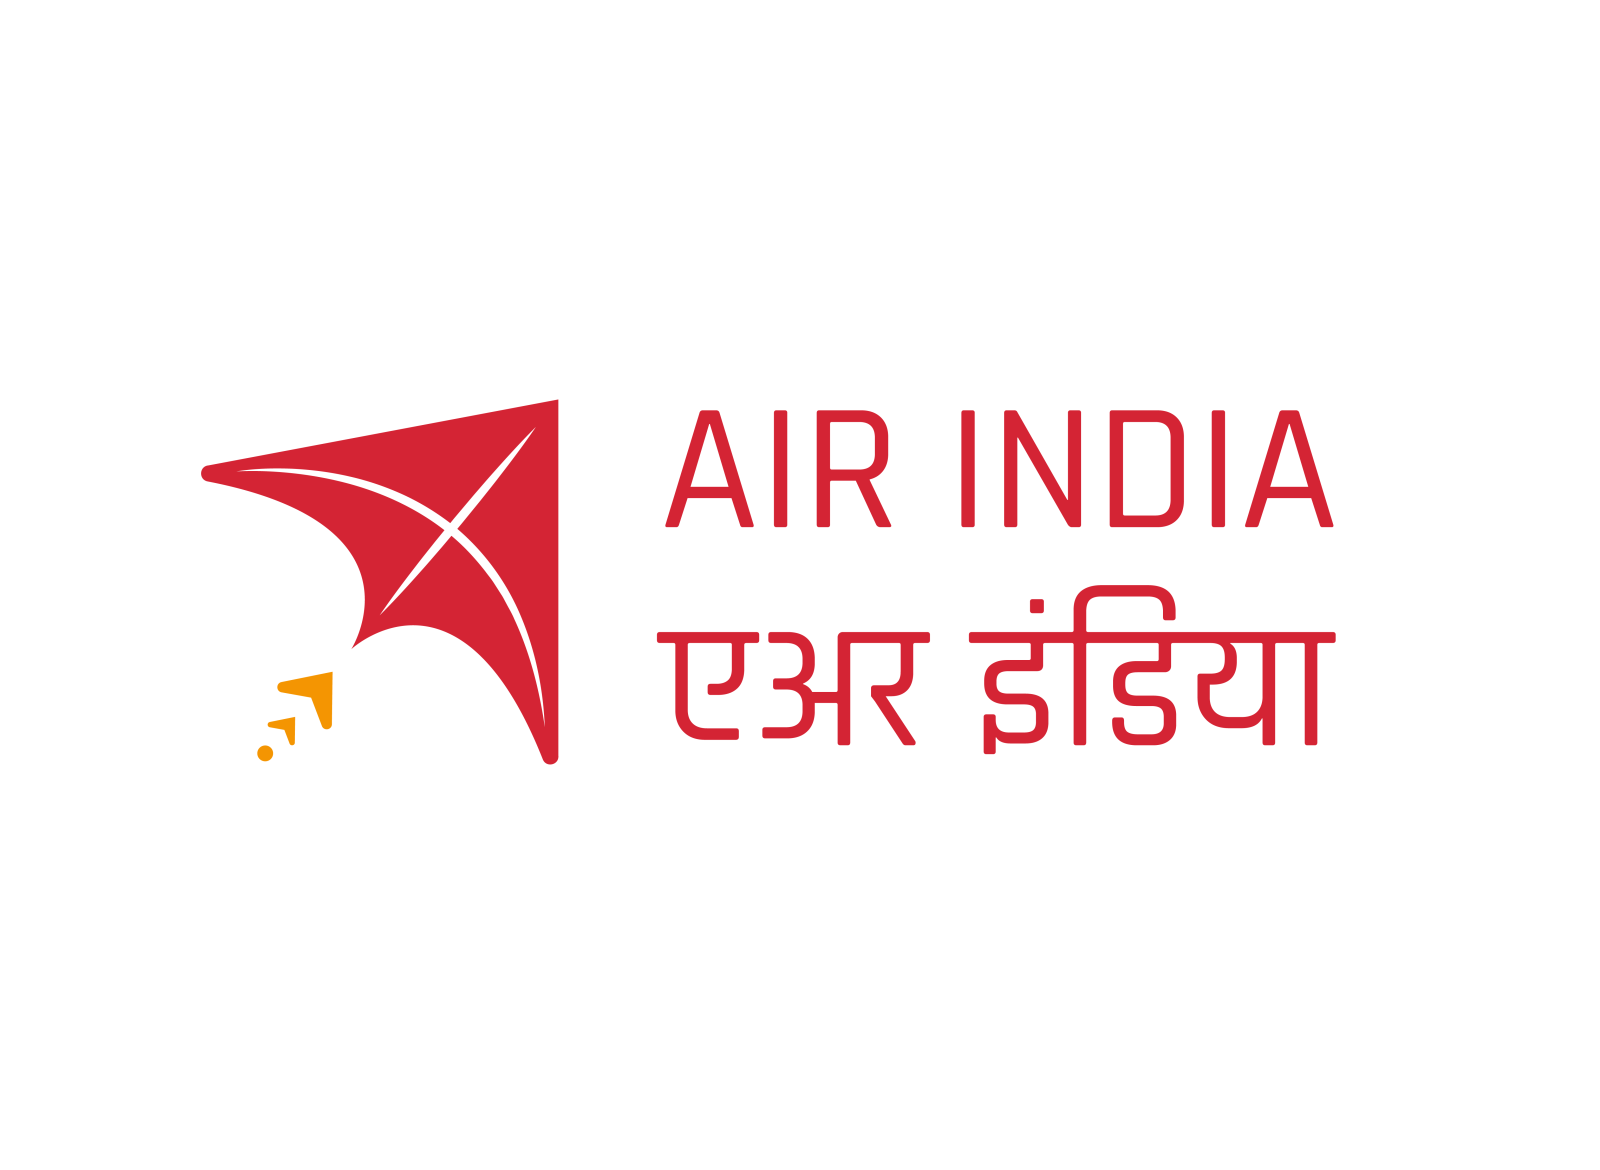 Air India To Get New Logo And Colour? All About The Much-Awaited Revamp |  India News, Times Now